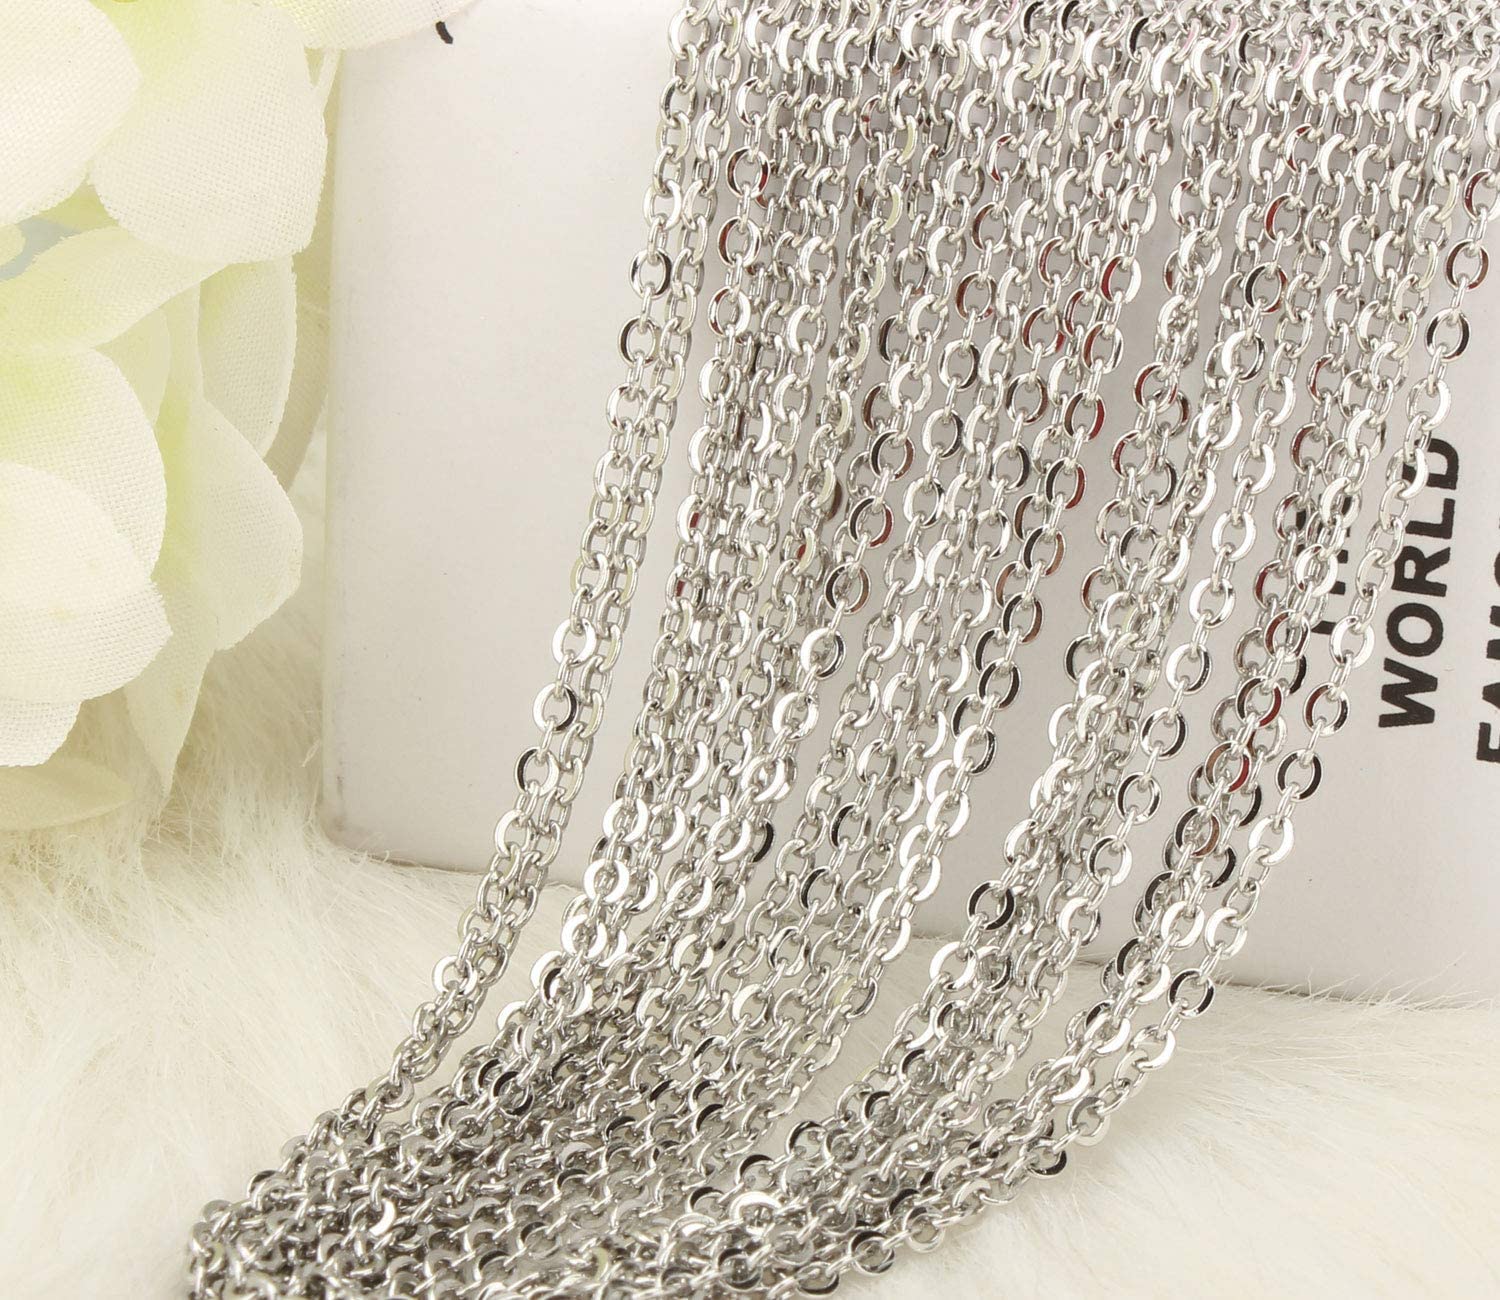 12 Pcs Stainless Steel Cable Chain Necklace Chains Bulk for Women Jewelry  Making 